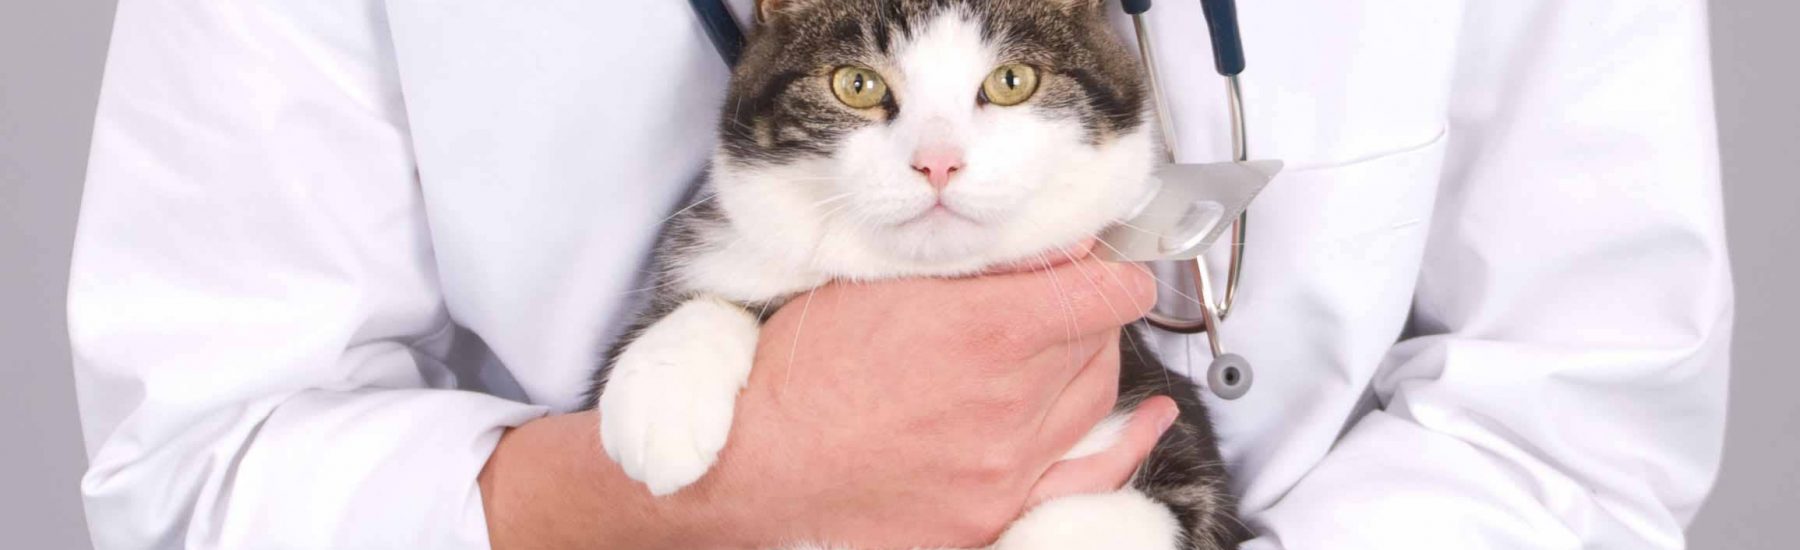 A cat being held by a vet